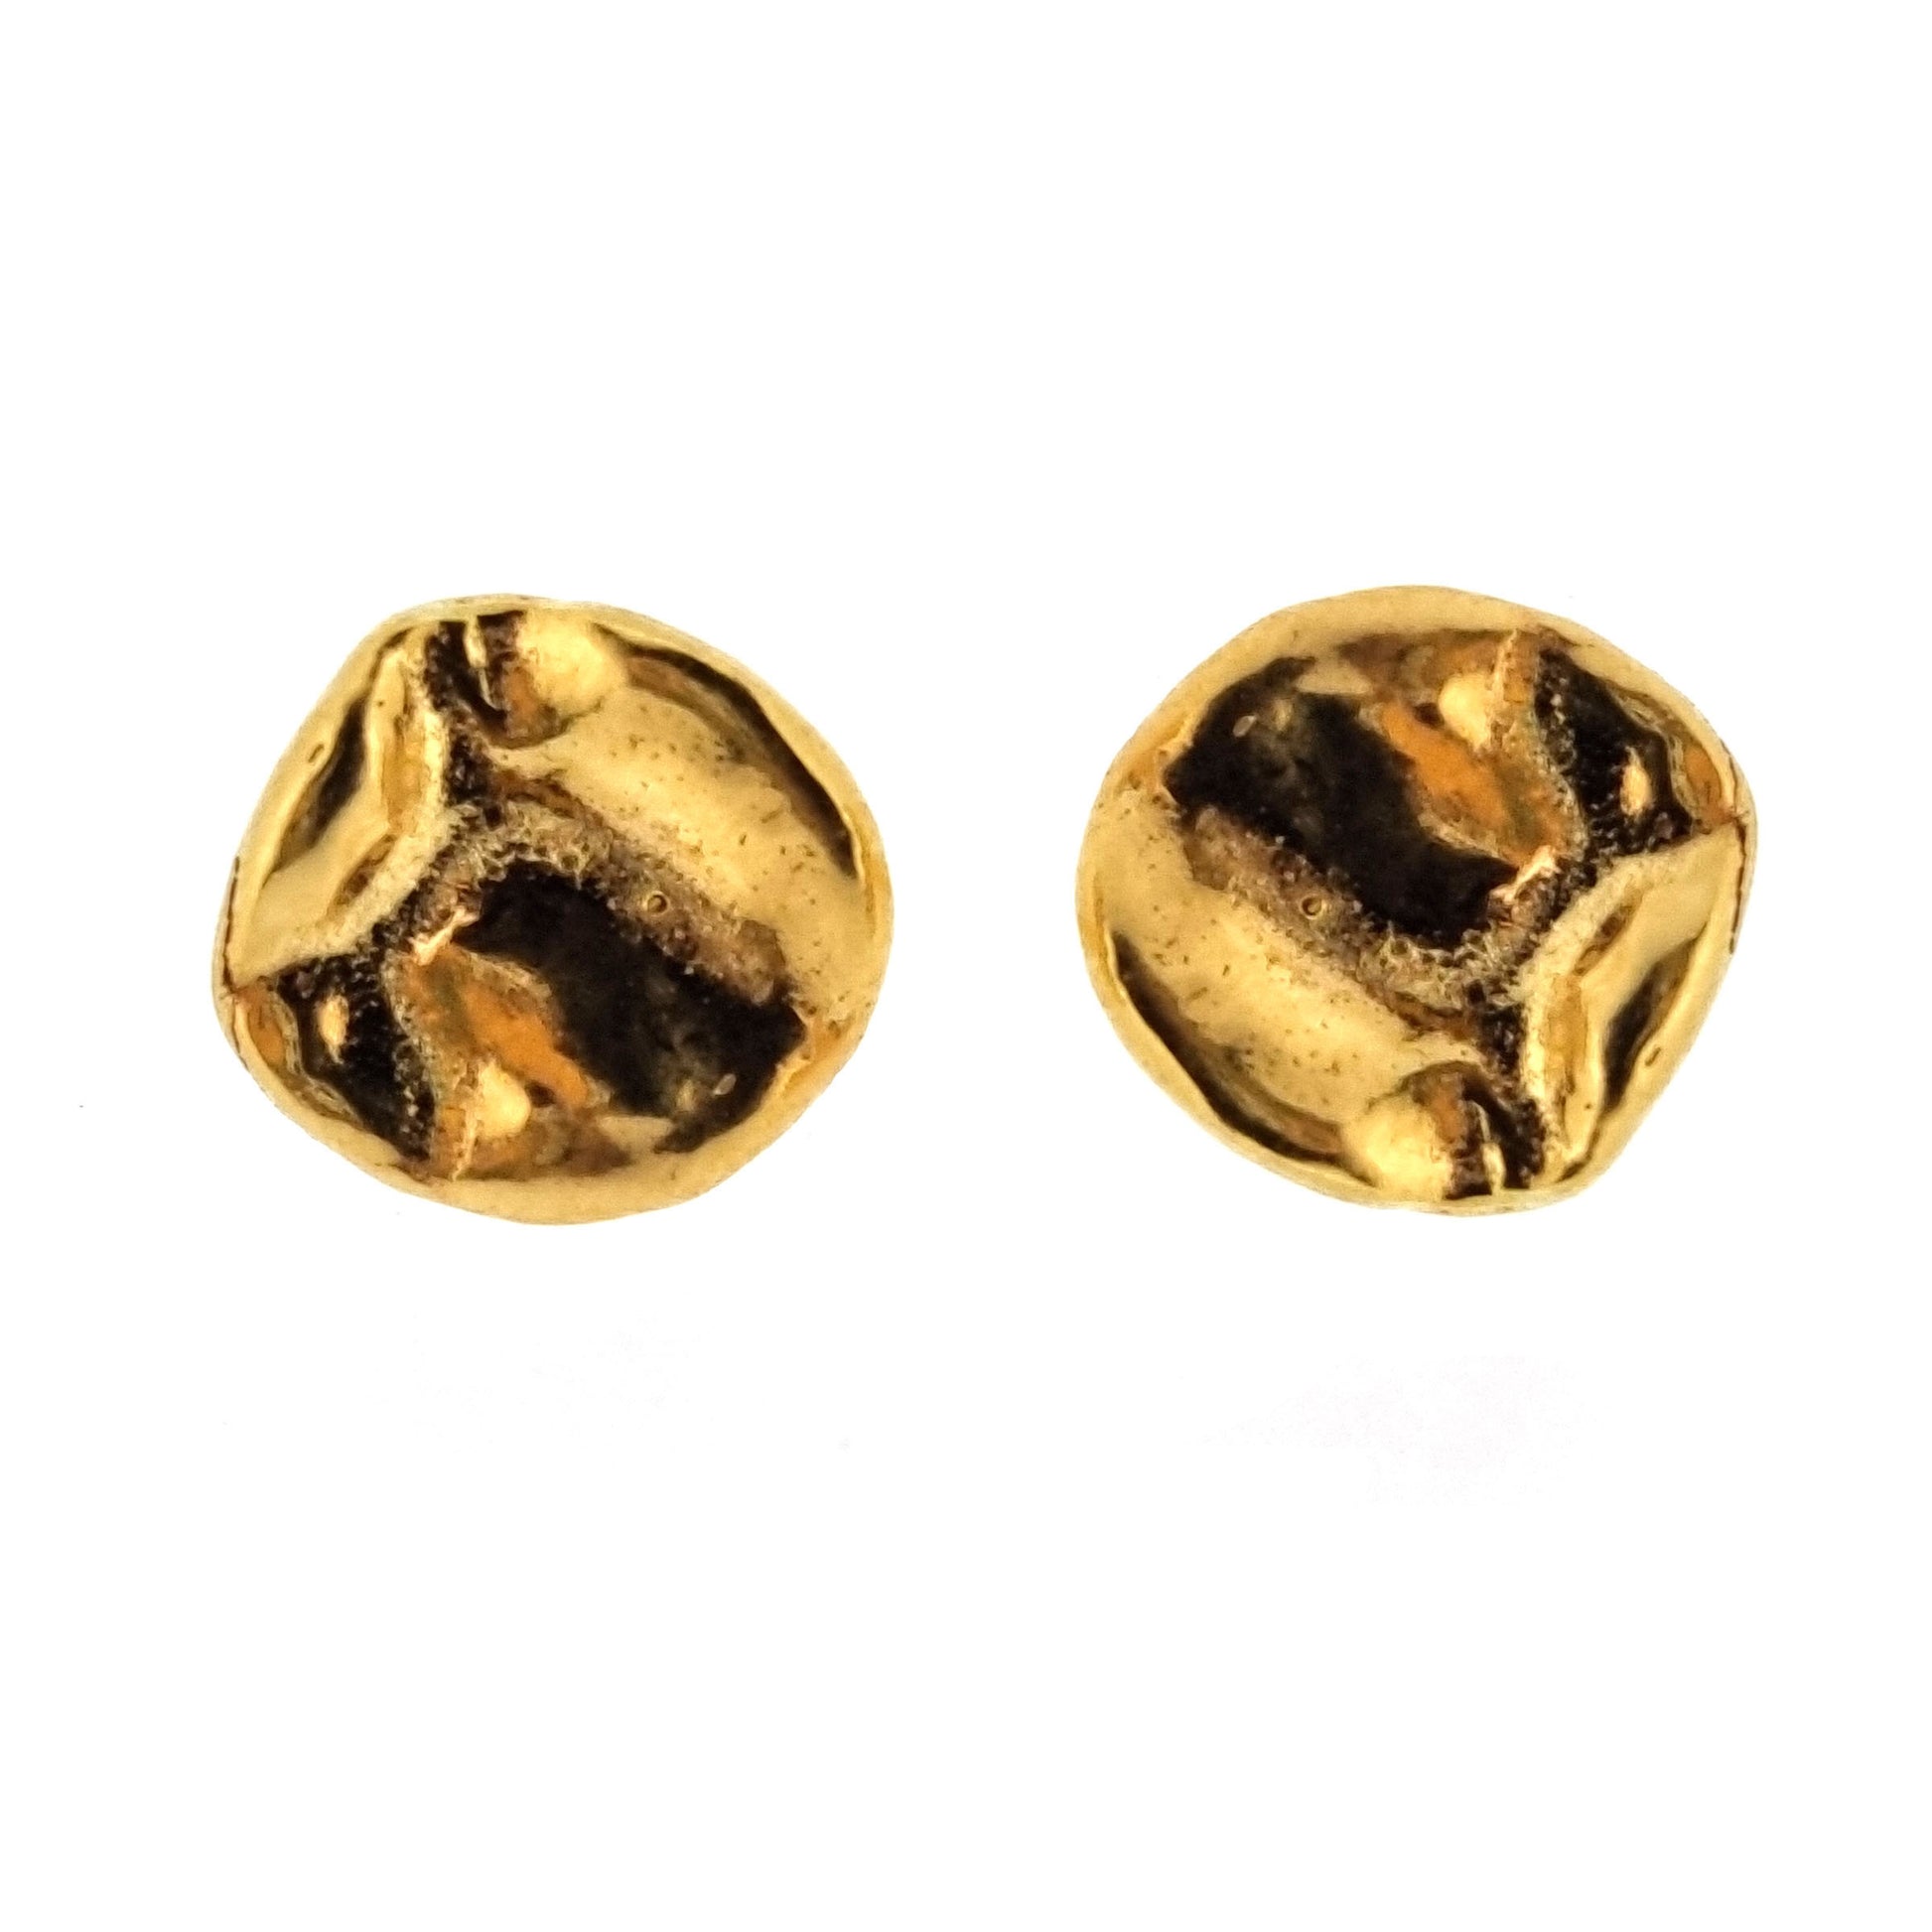 Yellow gold vermeil round stud earrings with a crumpled textured surface.